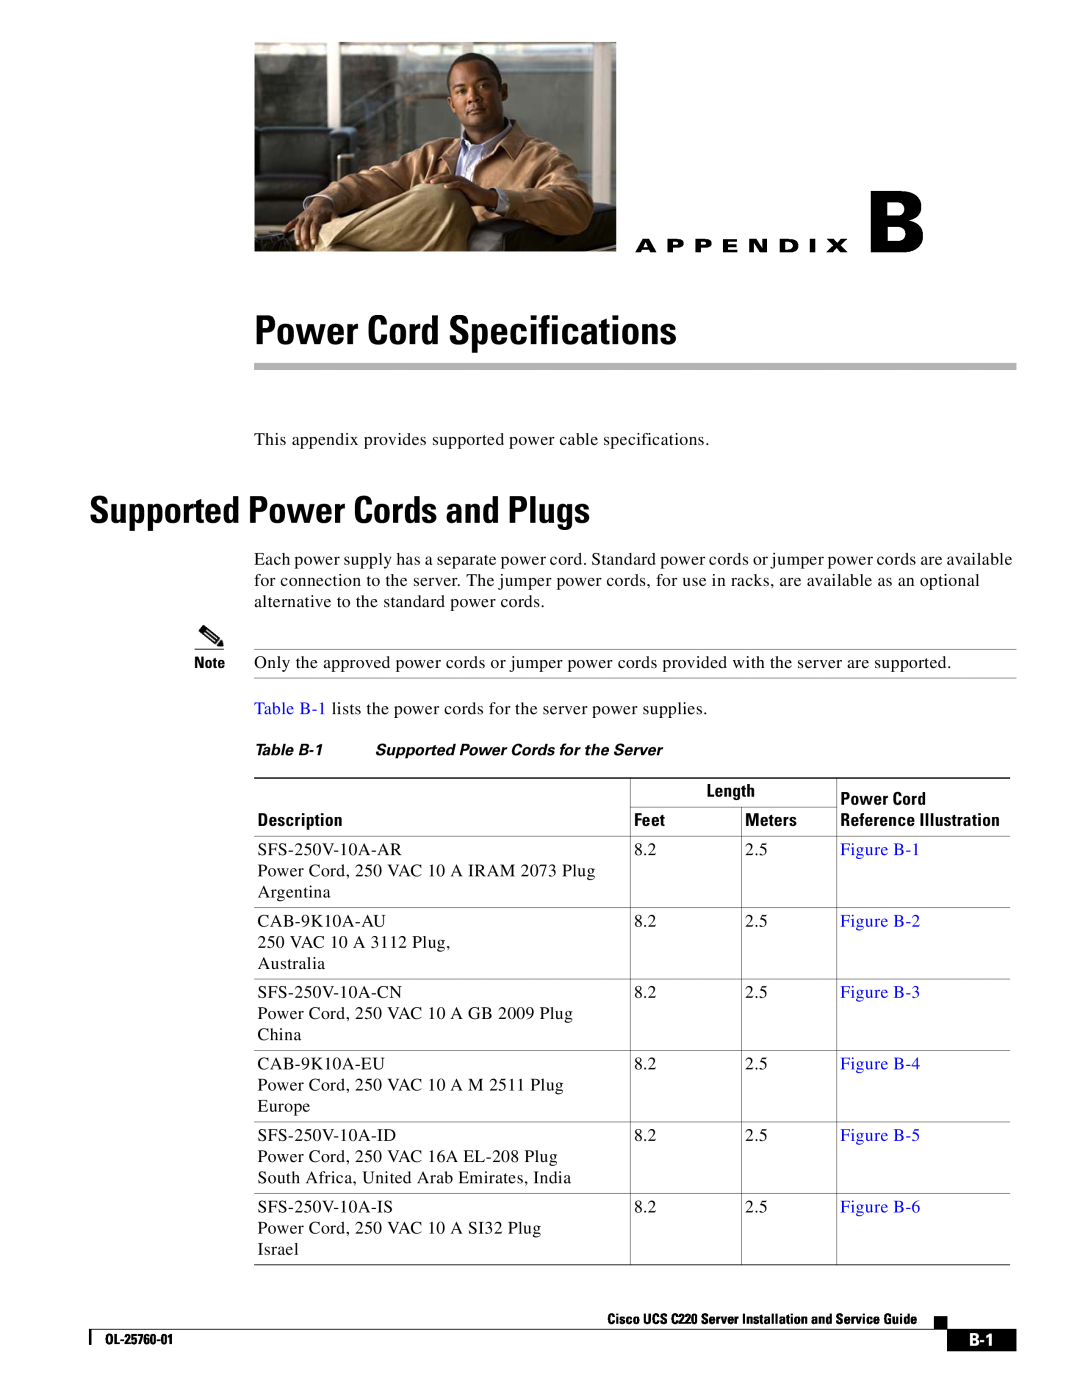 Cisco Systems UCSSP6C220E manual Power Cord Specifications, Supported Power Cords and Plugs, A P P E N D I X B, Figure B-1 